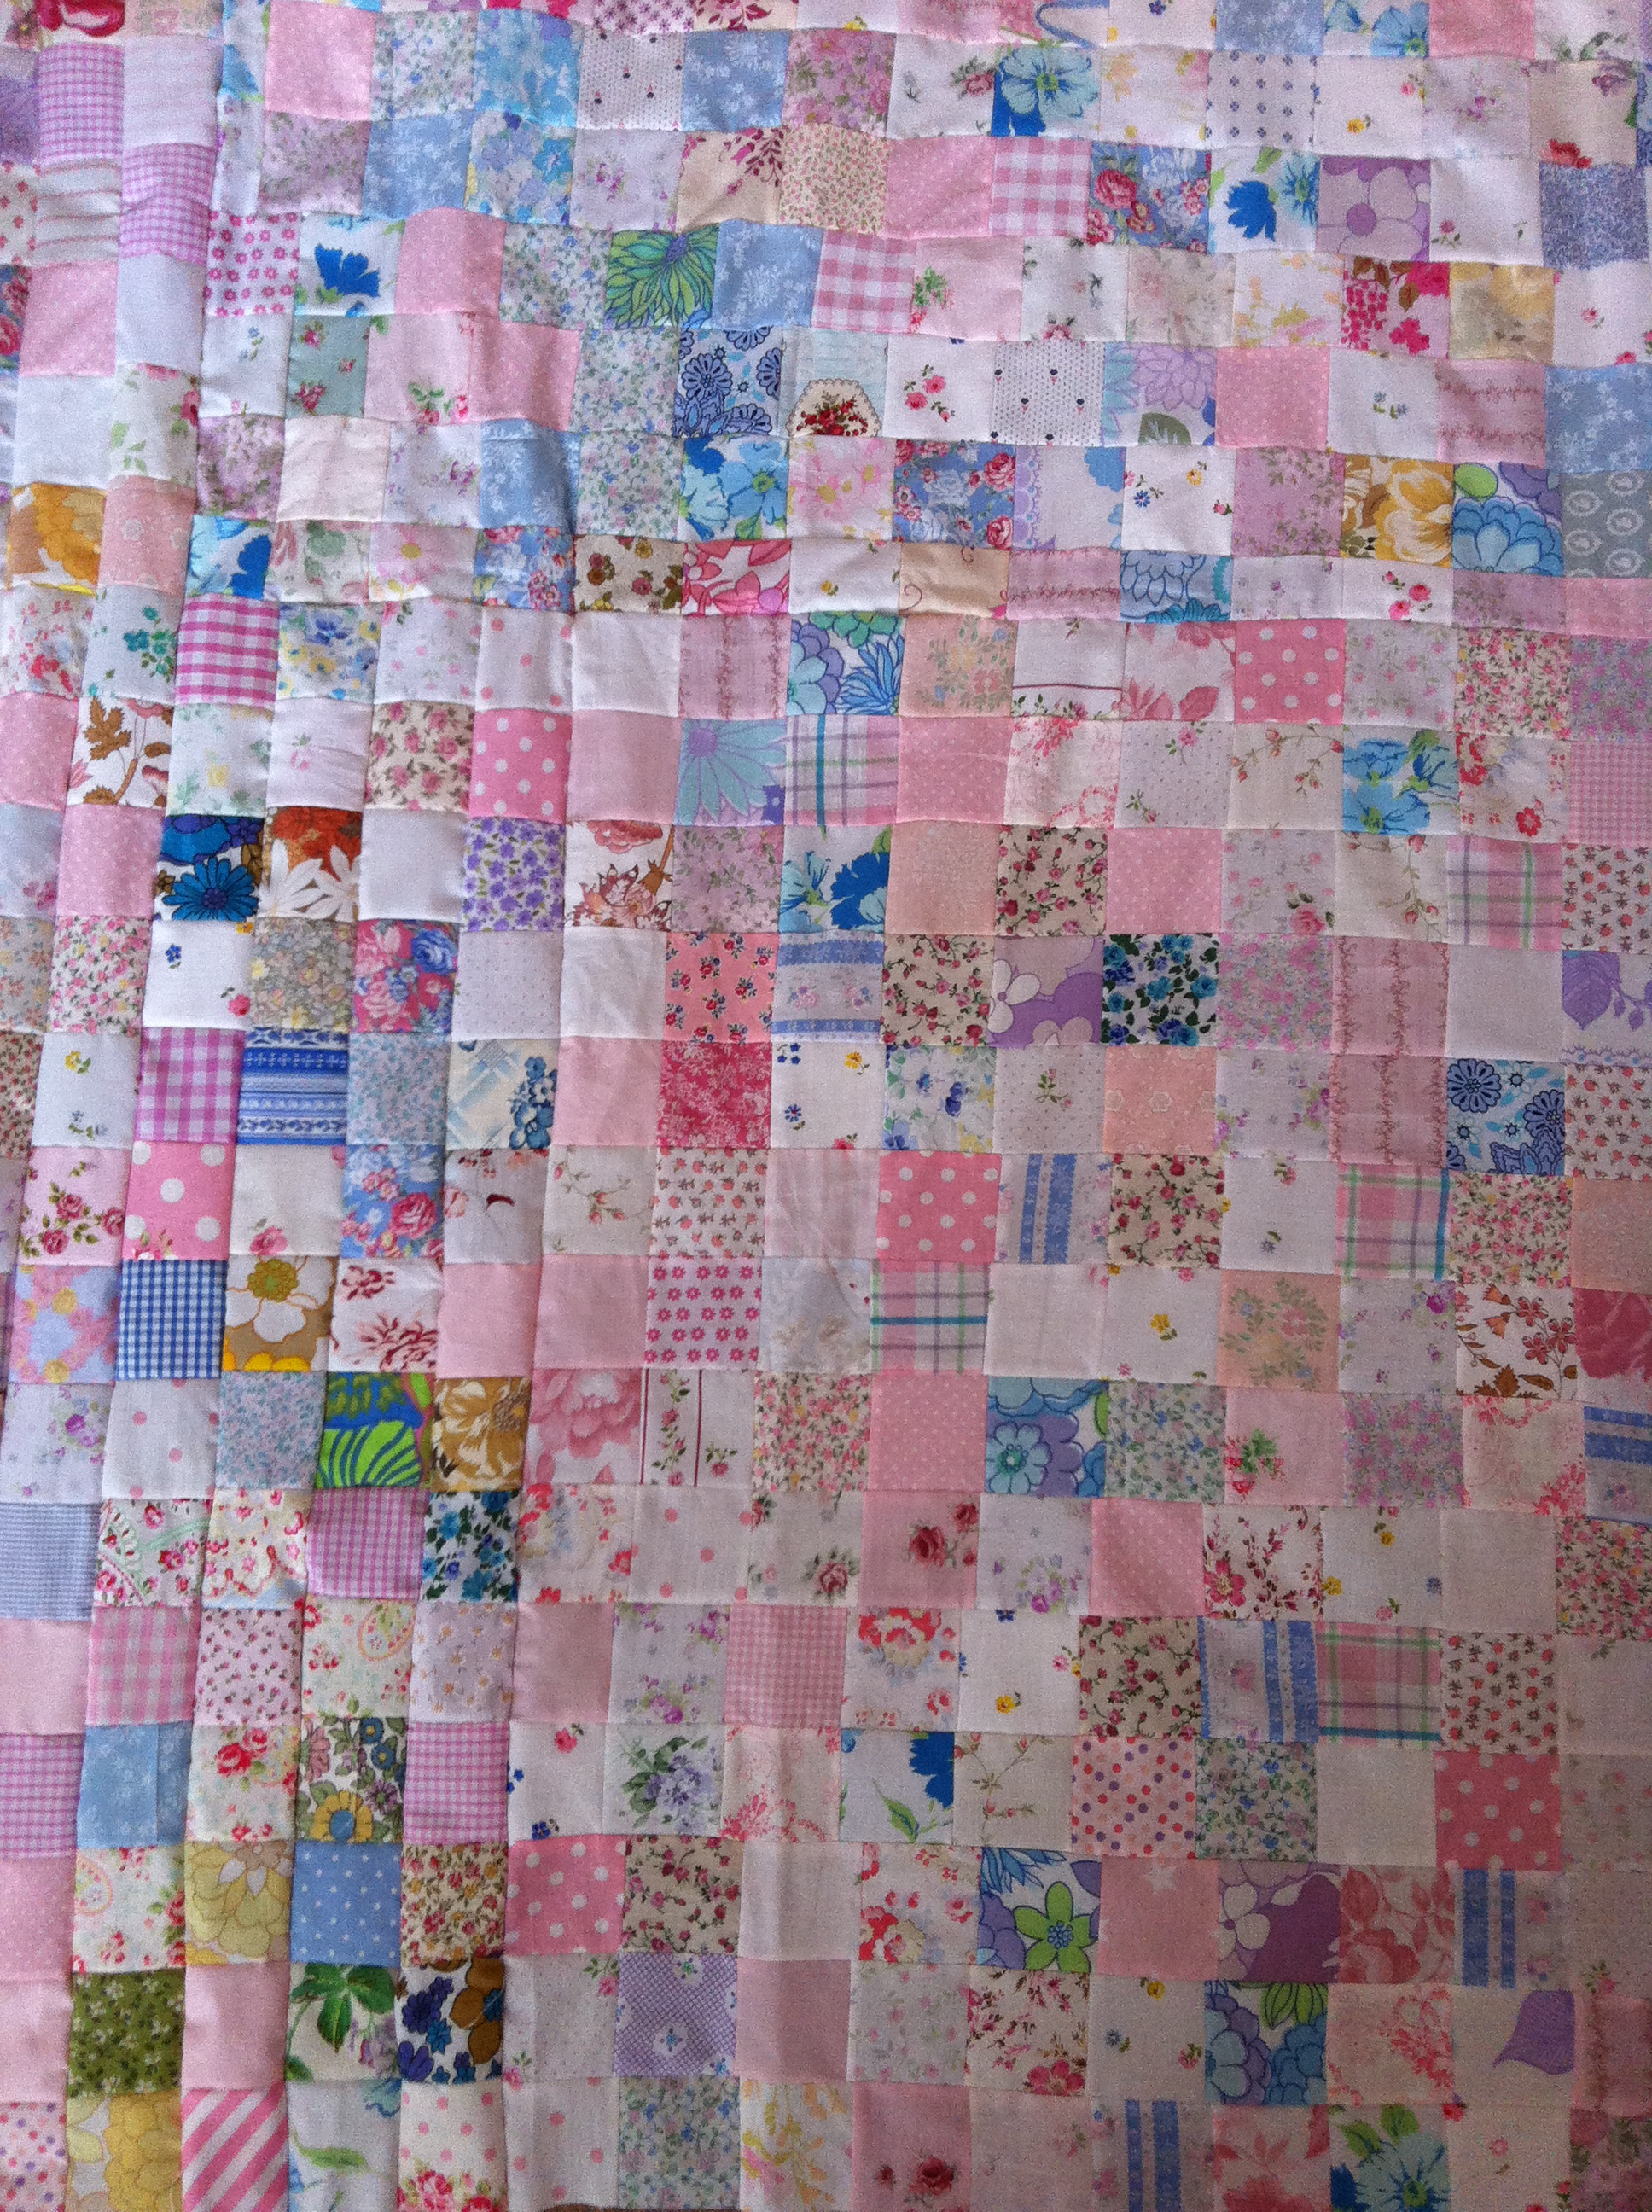 Huge Patchwork Quilt Scenery Background